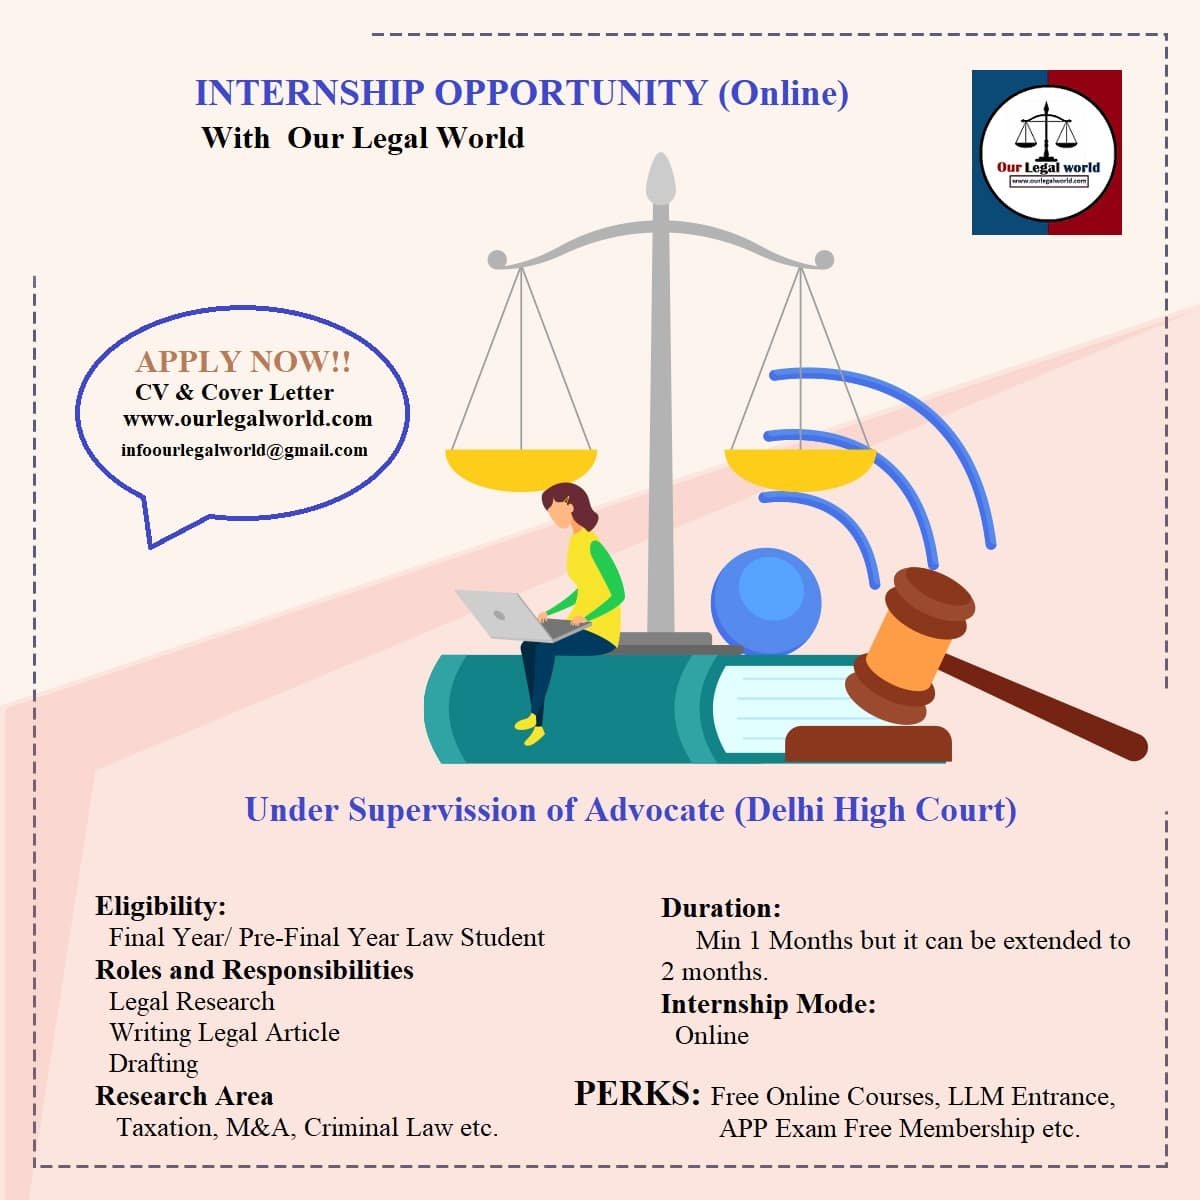 Online Legal Internship Opportunity with Our Legal World [Under Supervision of Delhi based Advocate]: Applications Open